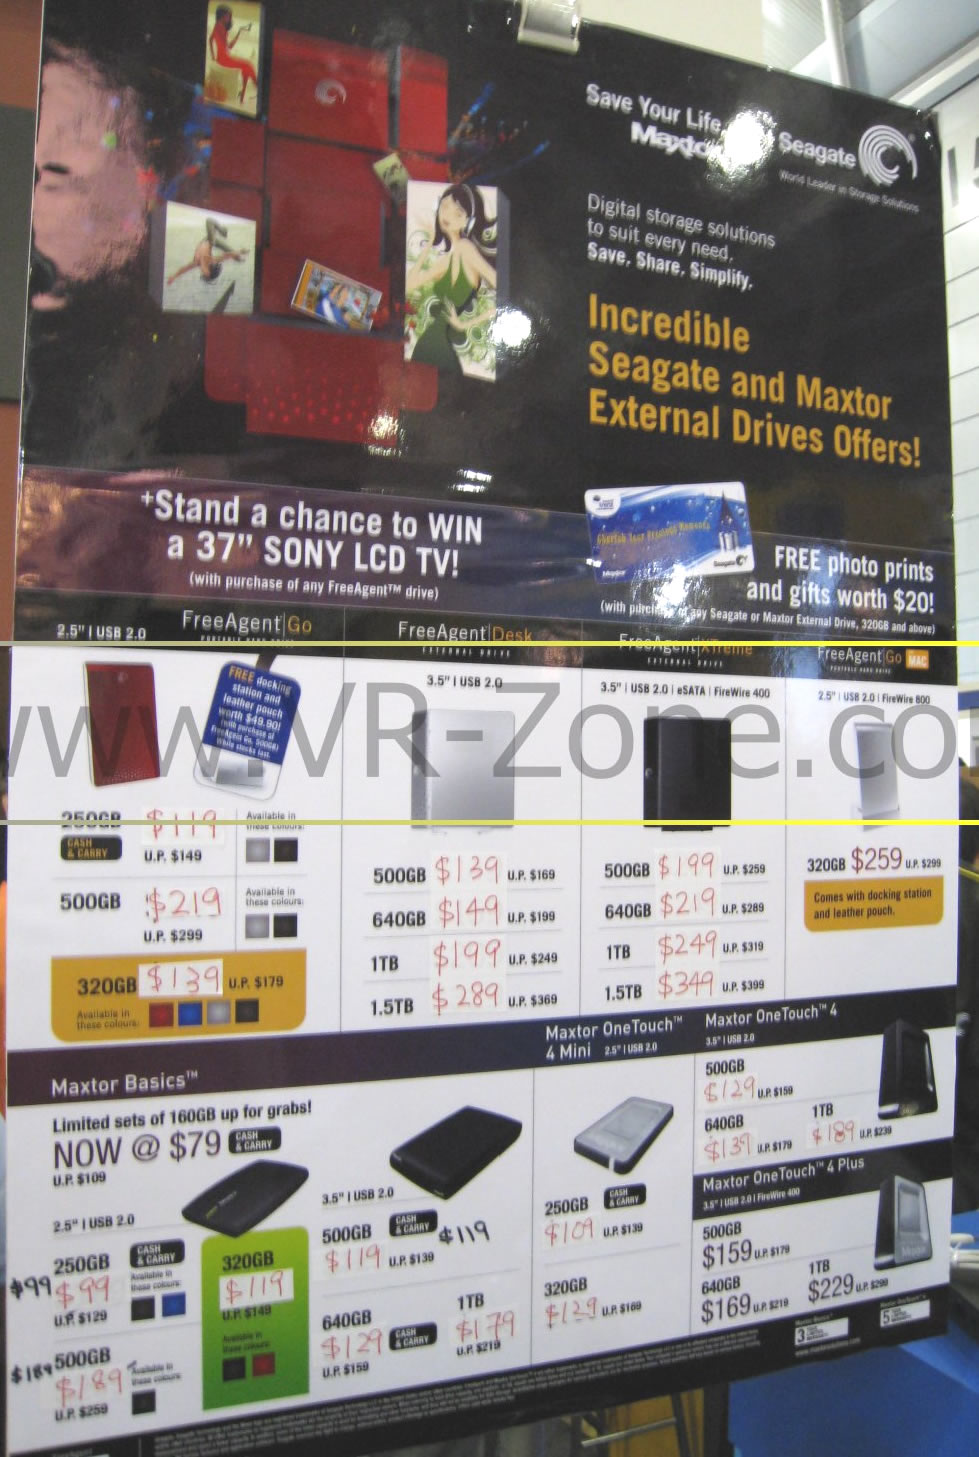 Sitex 2008 price list image brochure of (LAST DAY Deals) VR-Zone Maxtor IMG 1690